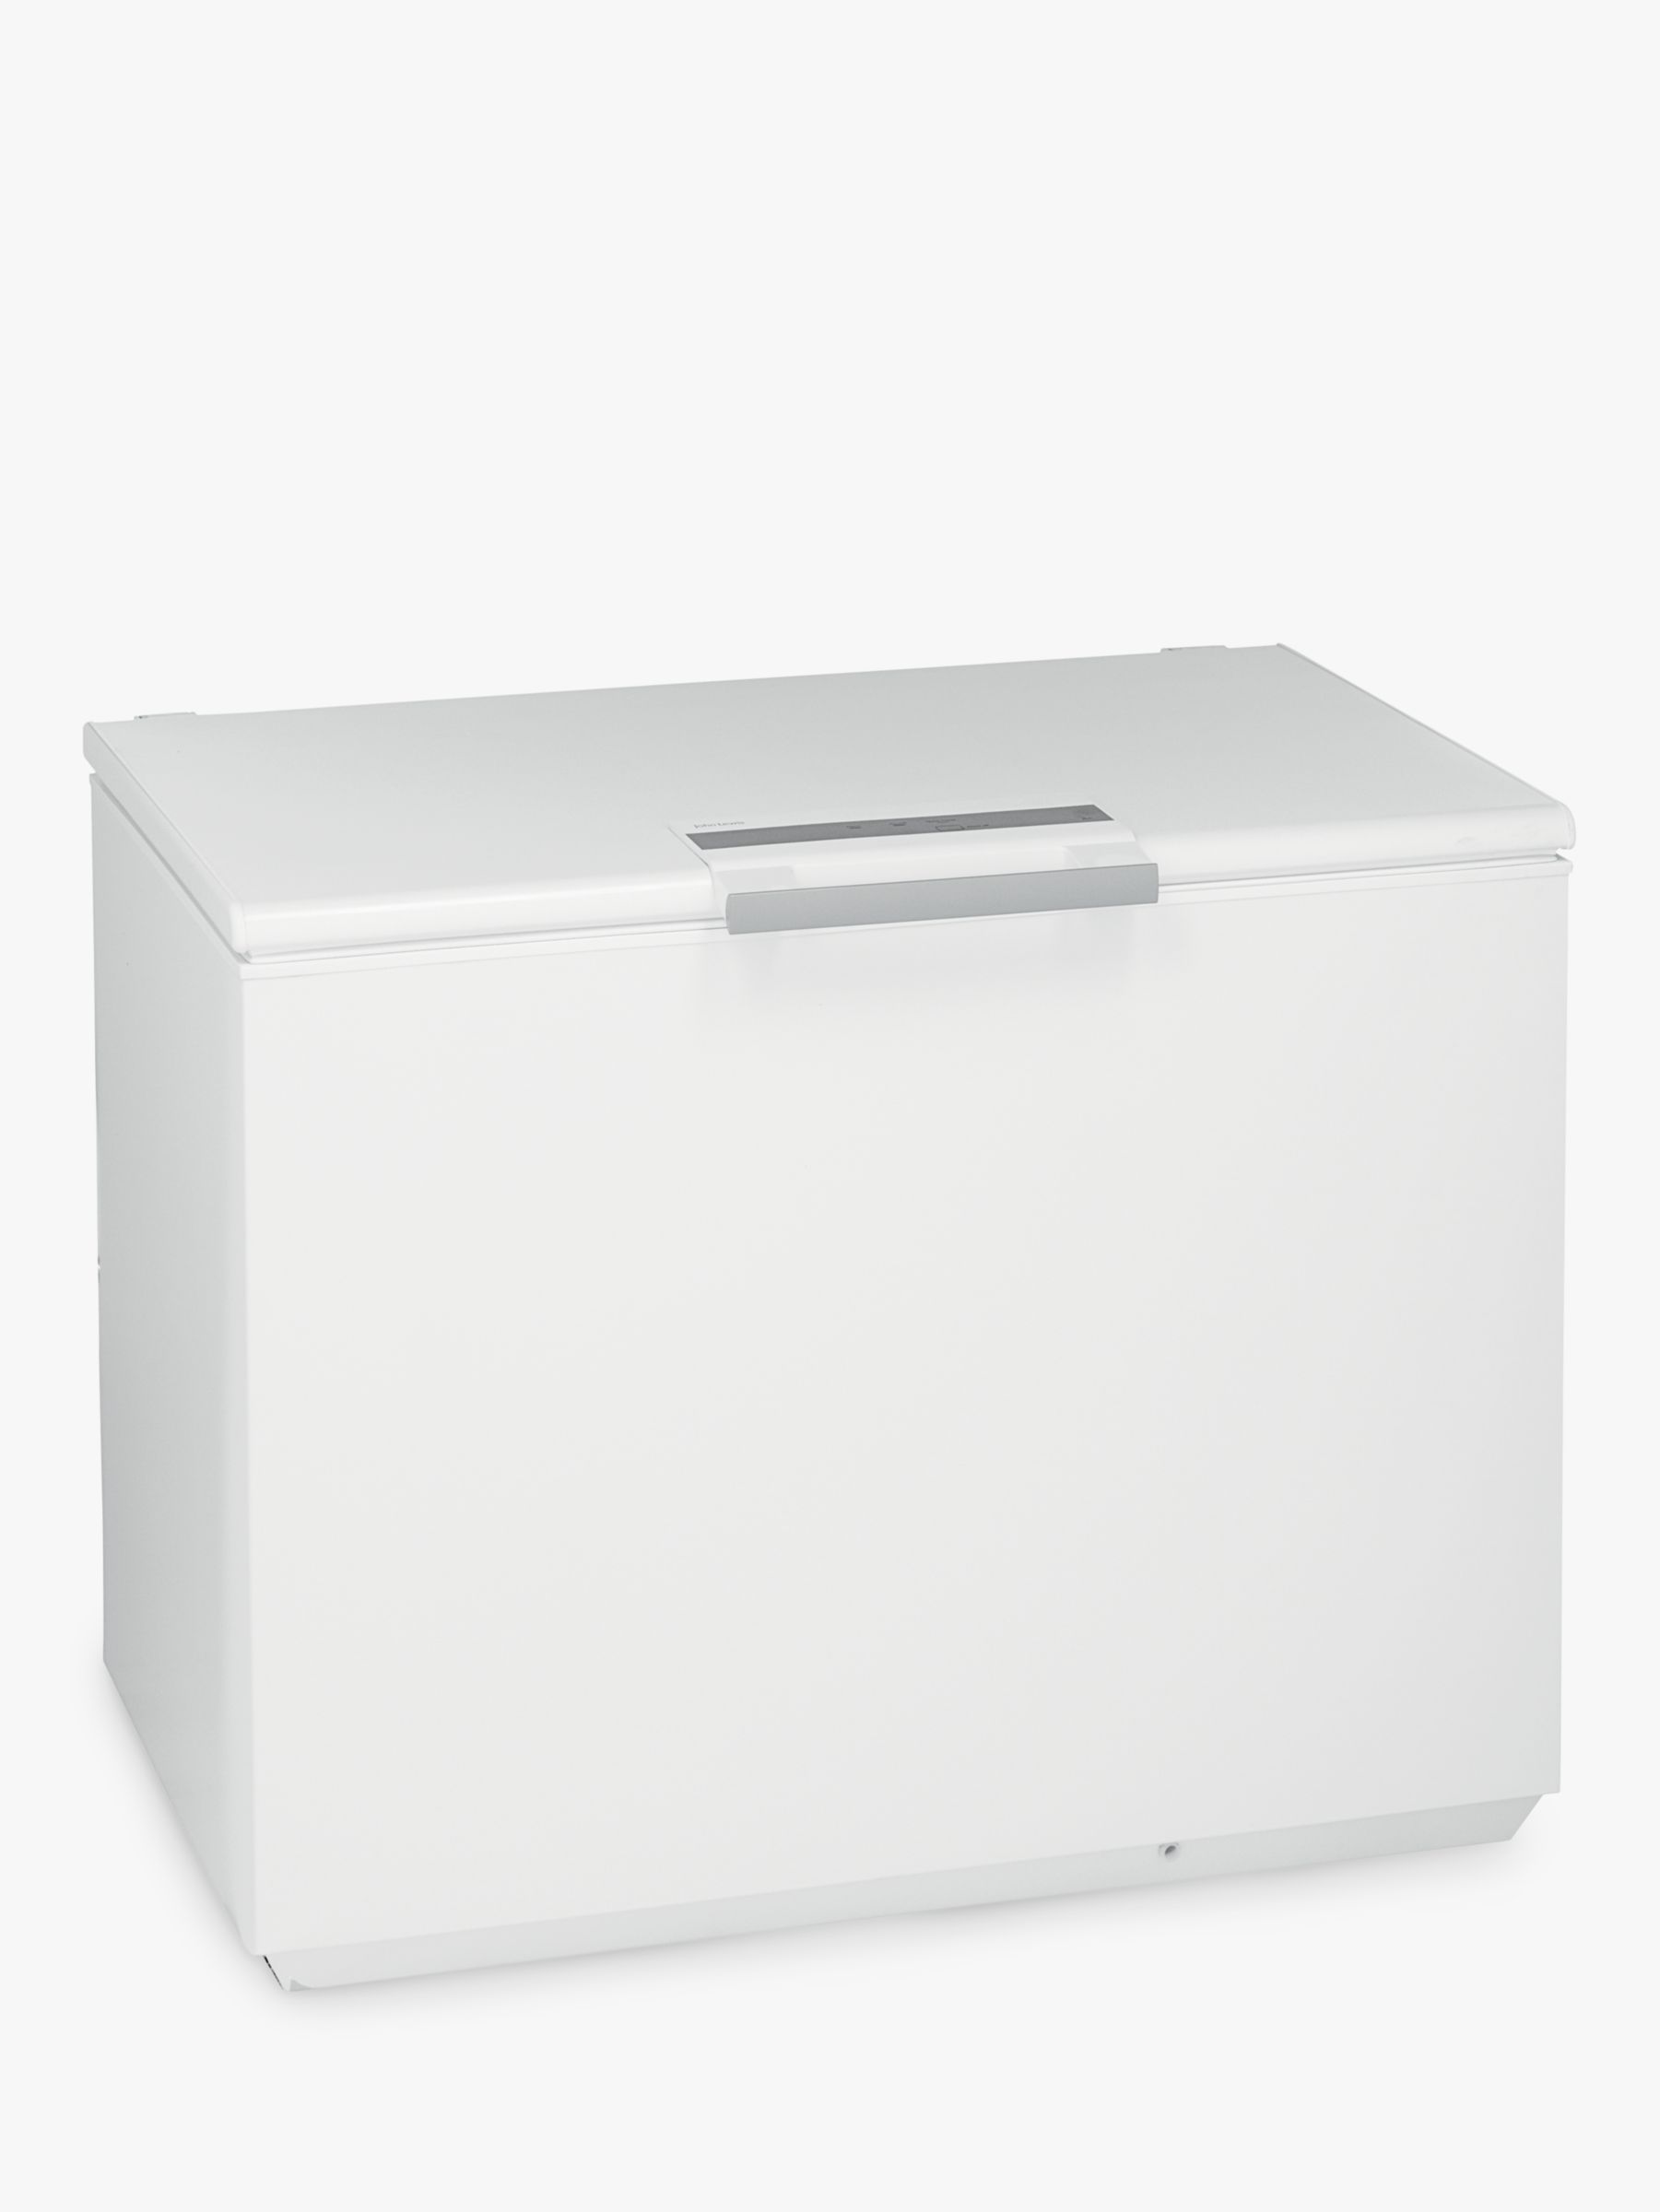 John Lewis JLCH300 Chest Freezer, A+ Energy Rating, 106cm Wide in White